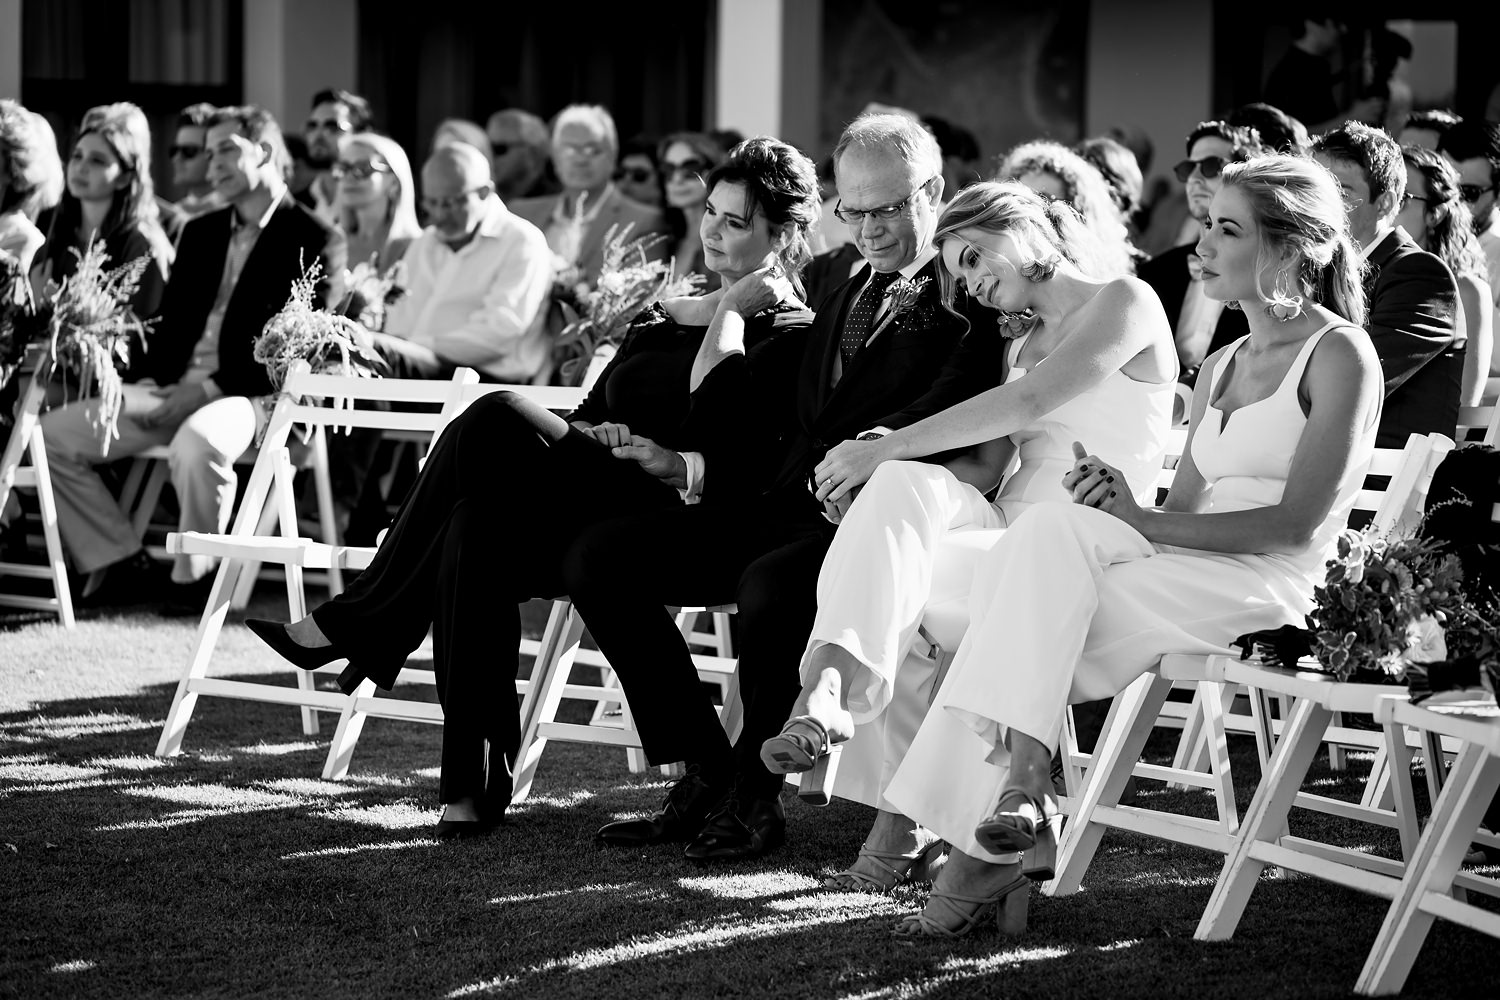 The bride's family embrace during a ceremony prayer. Classic black and white documentary photograph by by wedding photographer in South Africa, Niki M Photography